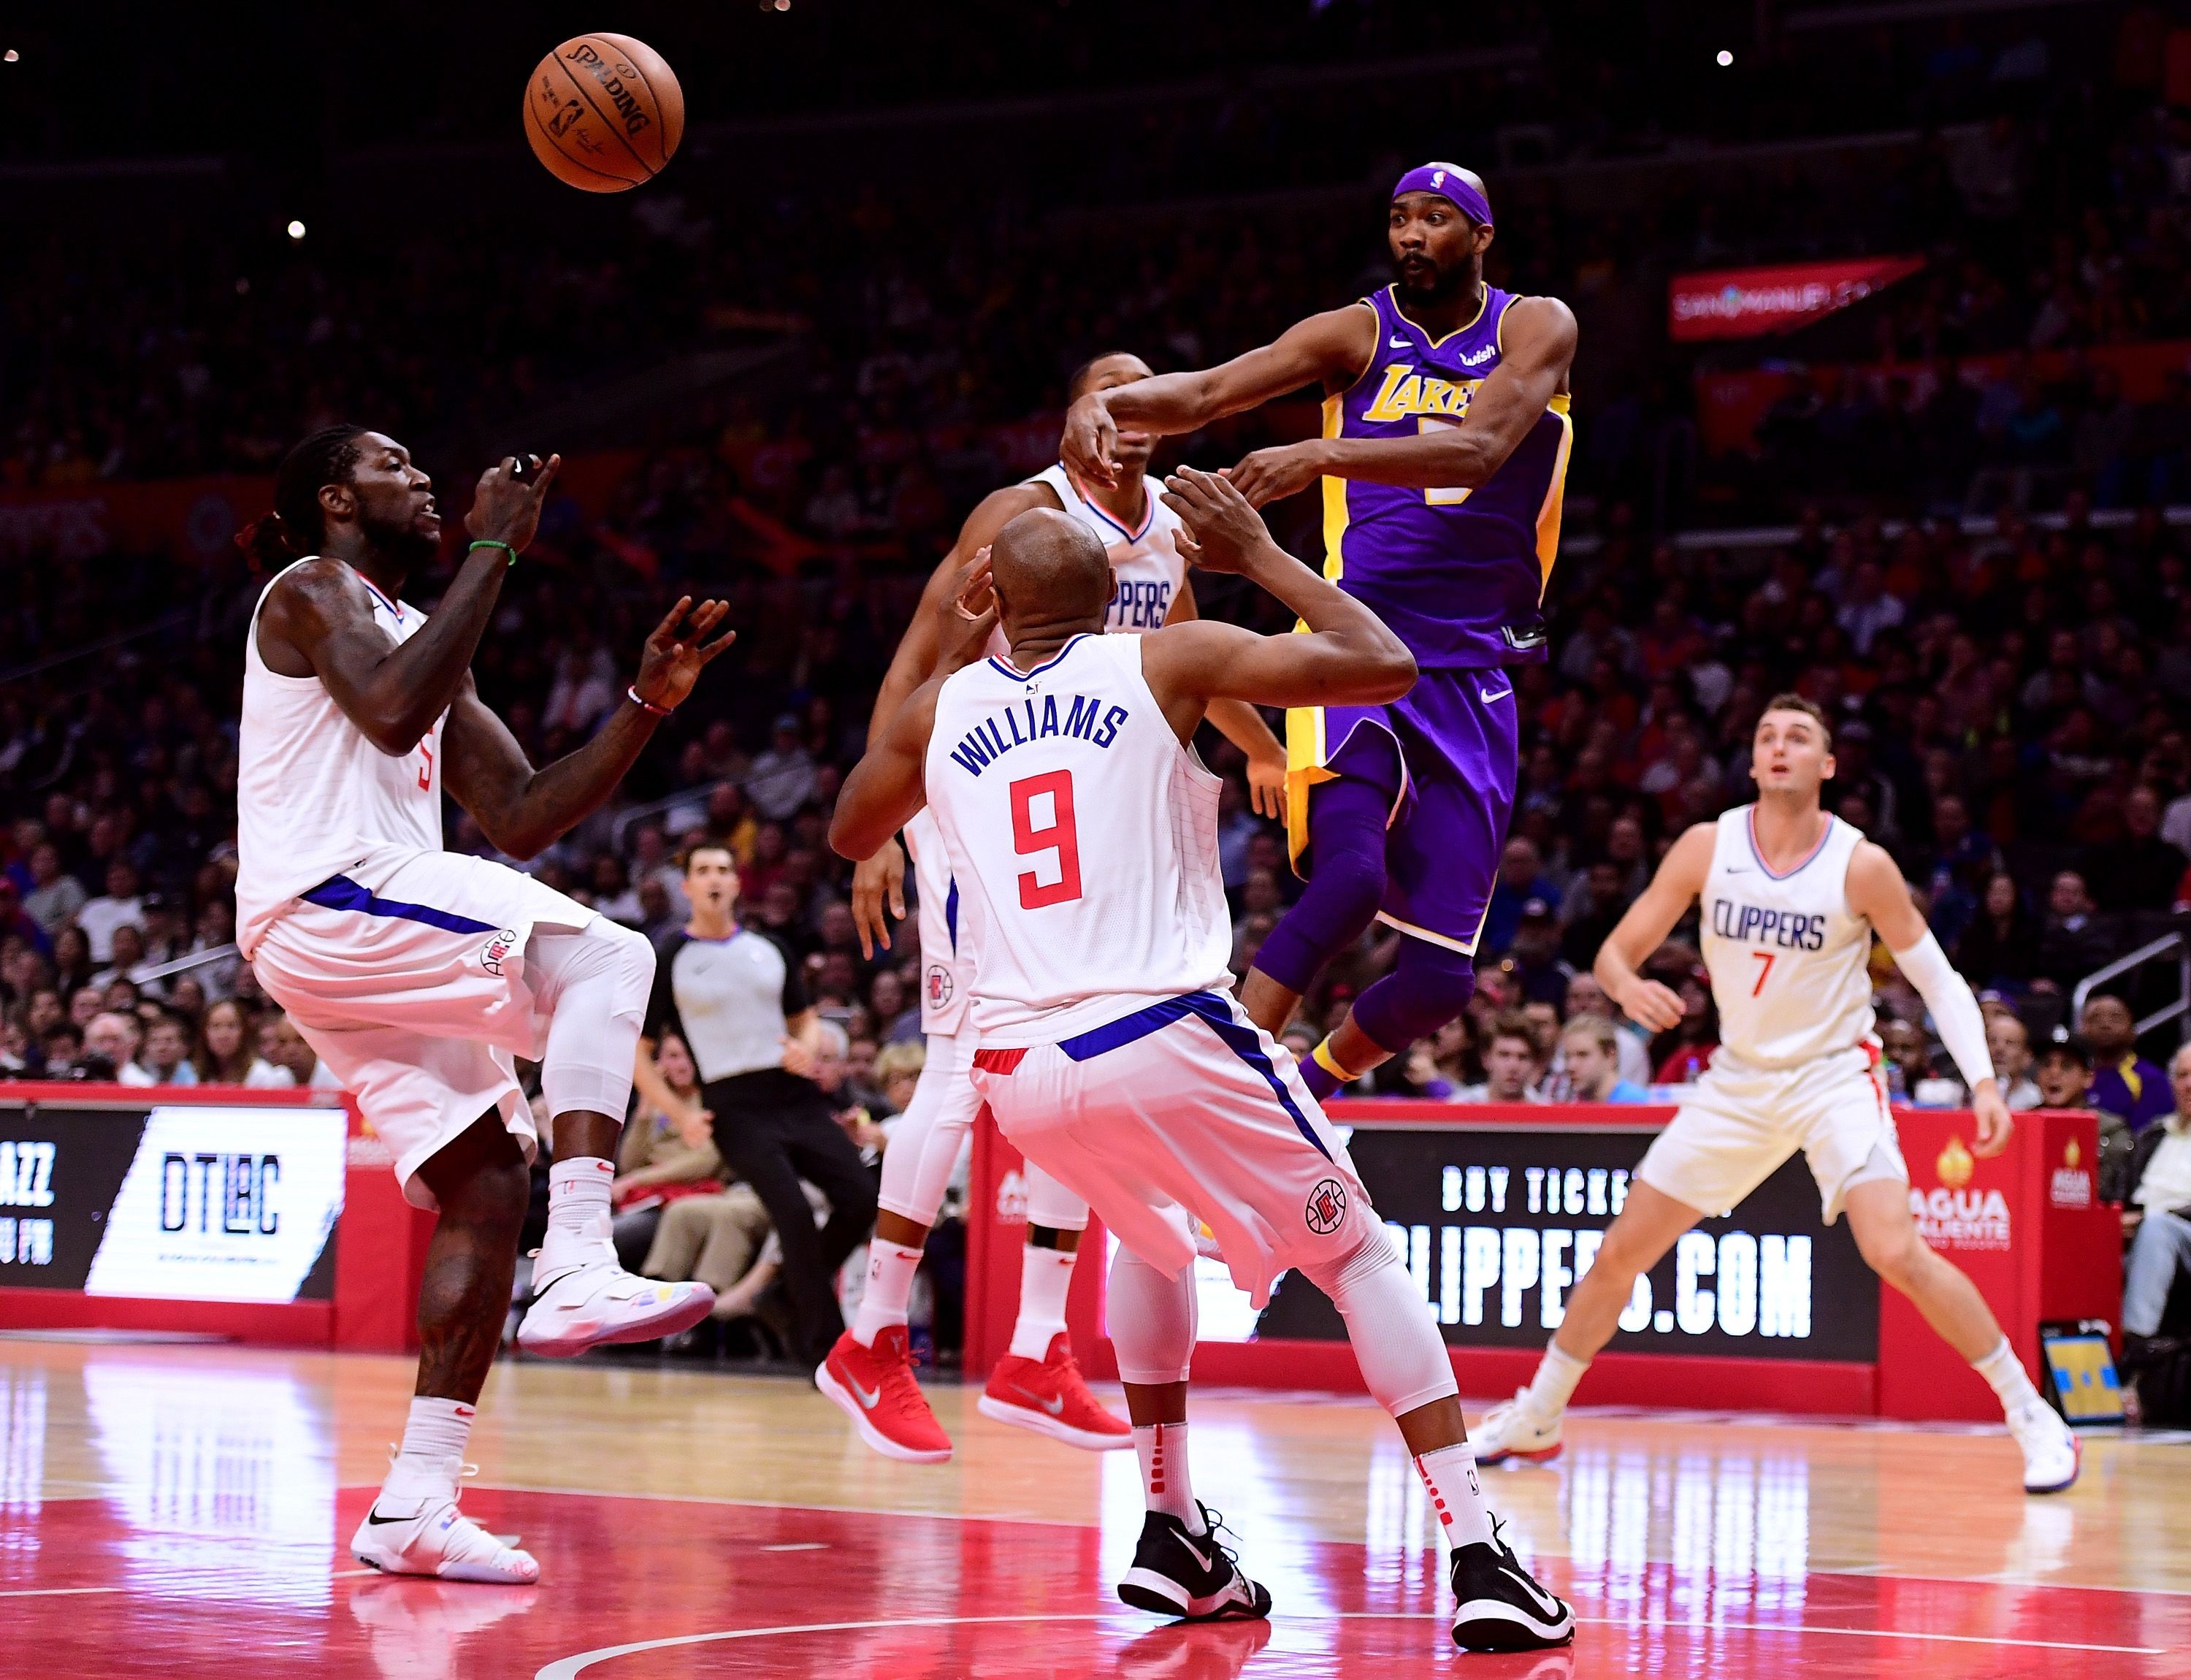 Los Angeles Lakers vs Los Angeles Clippers recap and highlights